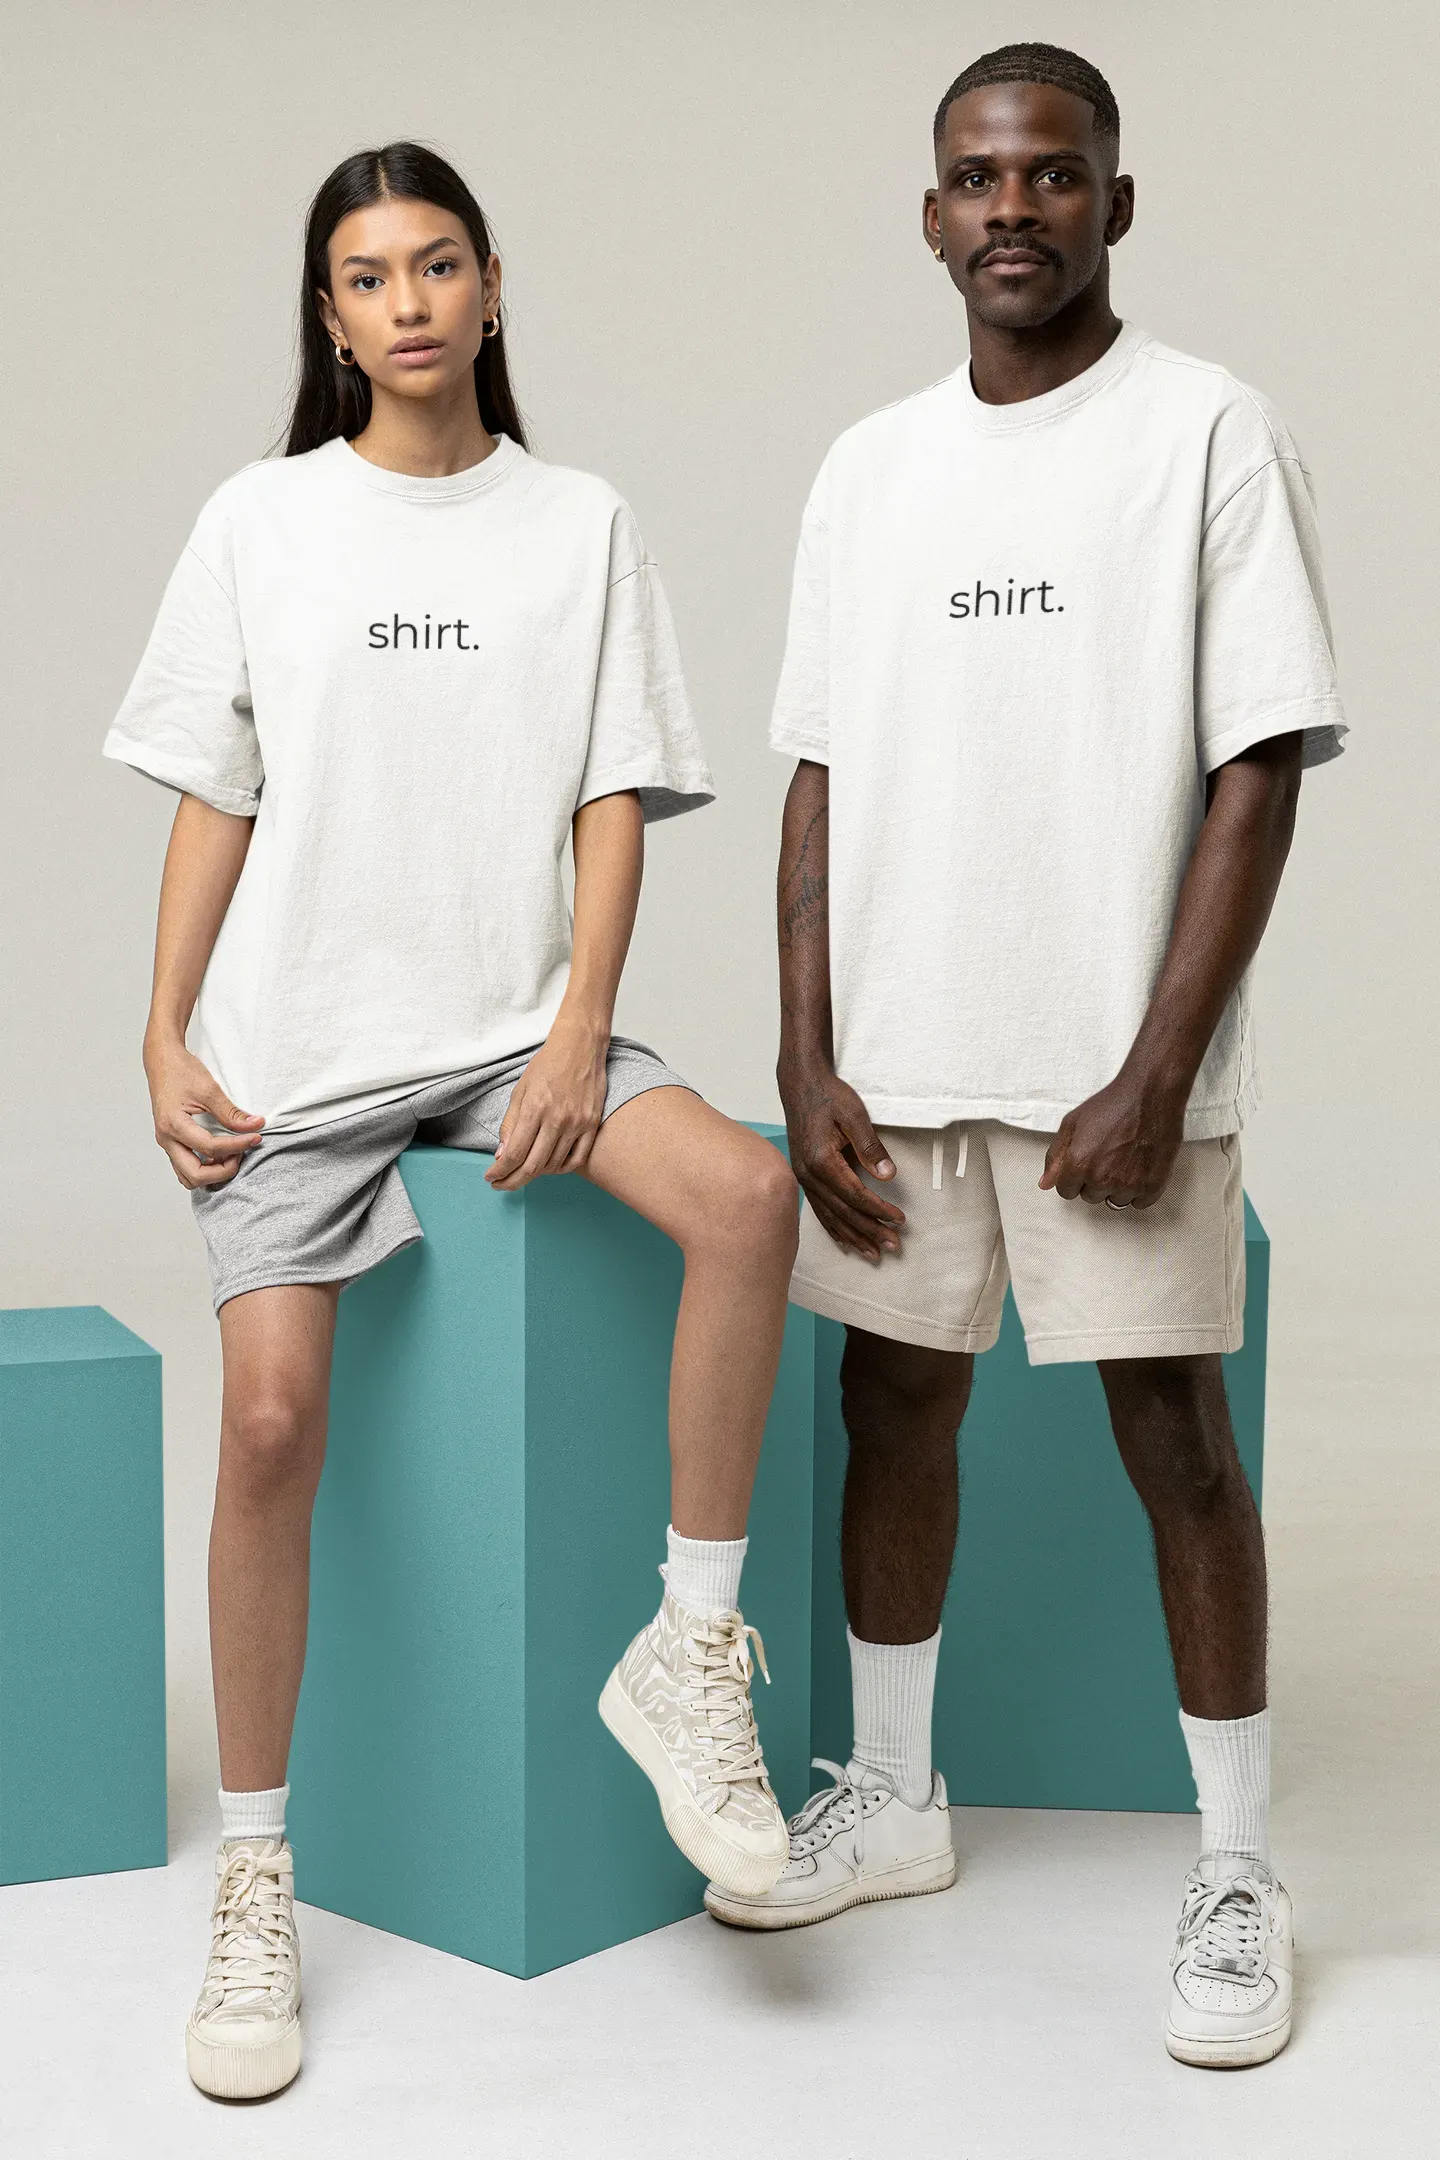 A man and a woman wearing shirts with the word 'shirt.' on them.